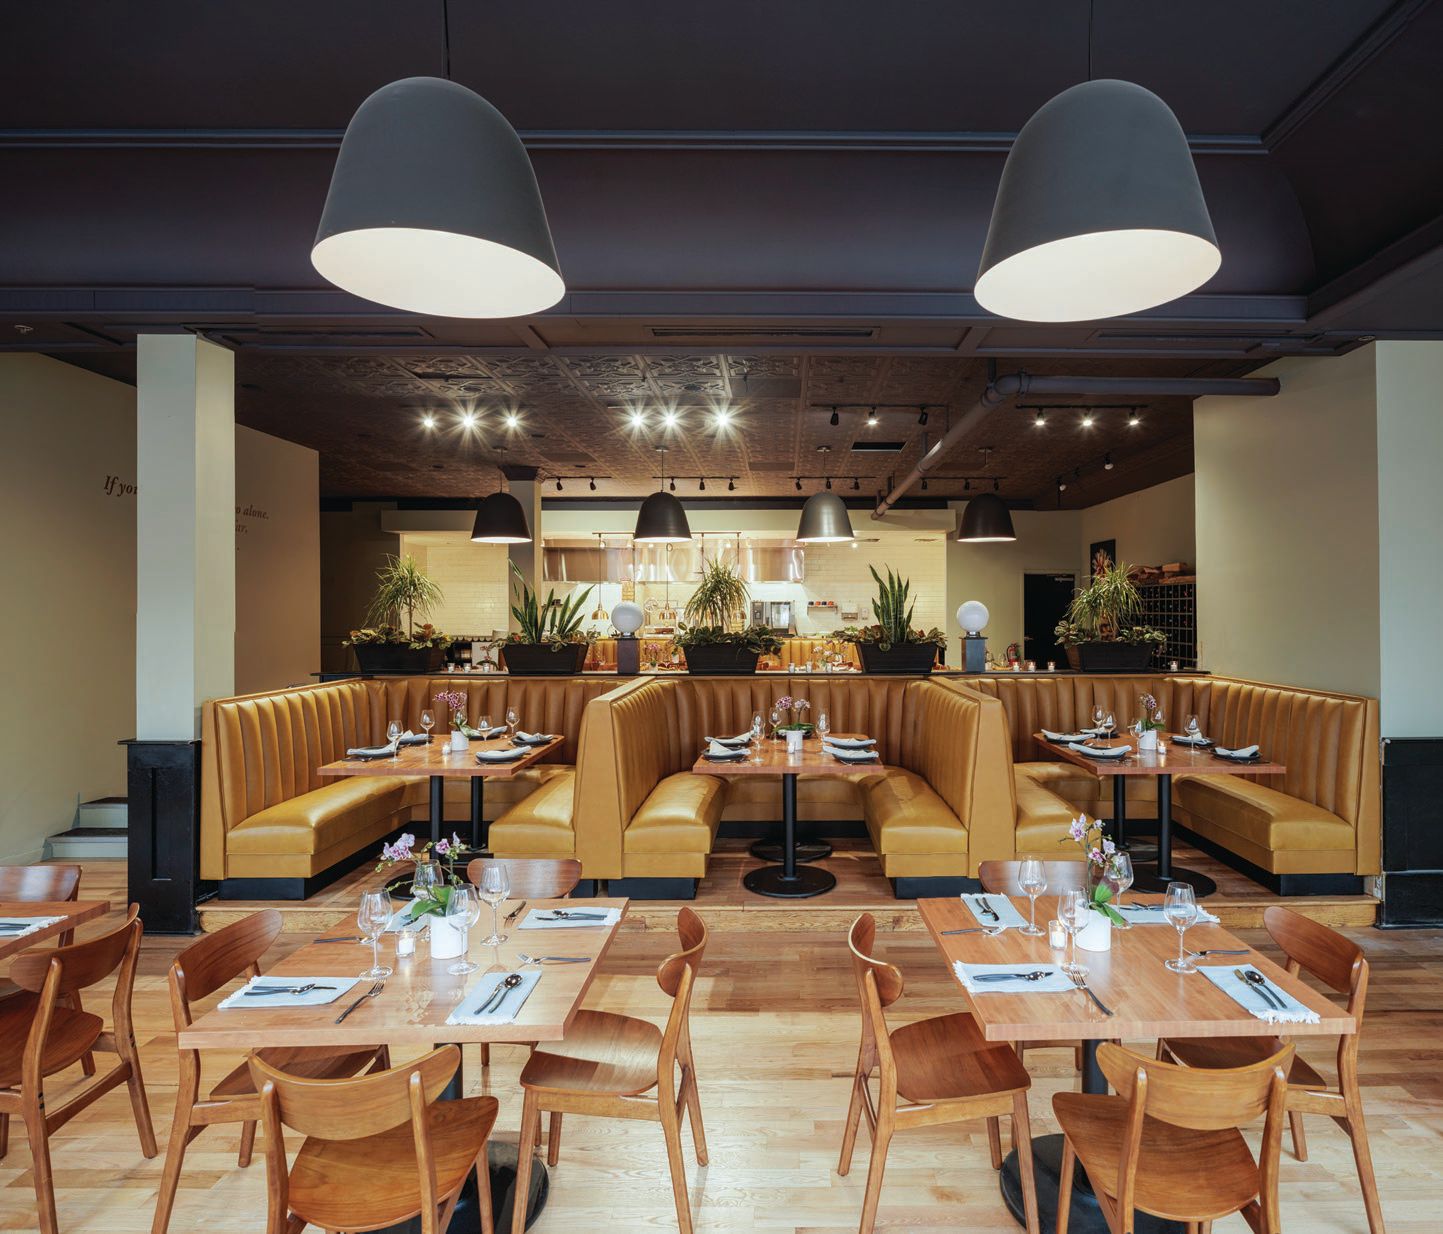 Kindred has Elmhurst buzzing with its open-flame cooking and inviting dining room. PHOTO COURTESY OF KINDRED